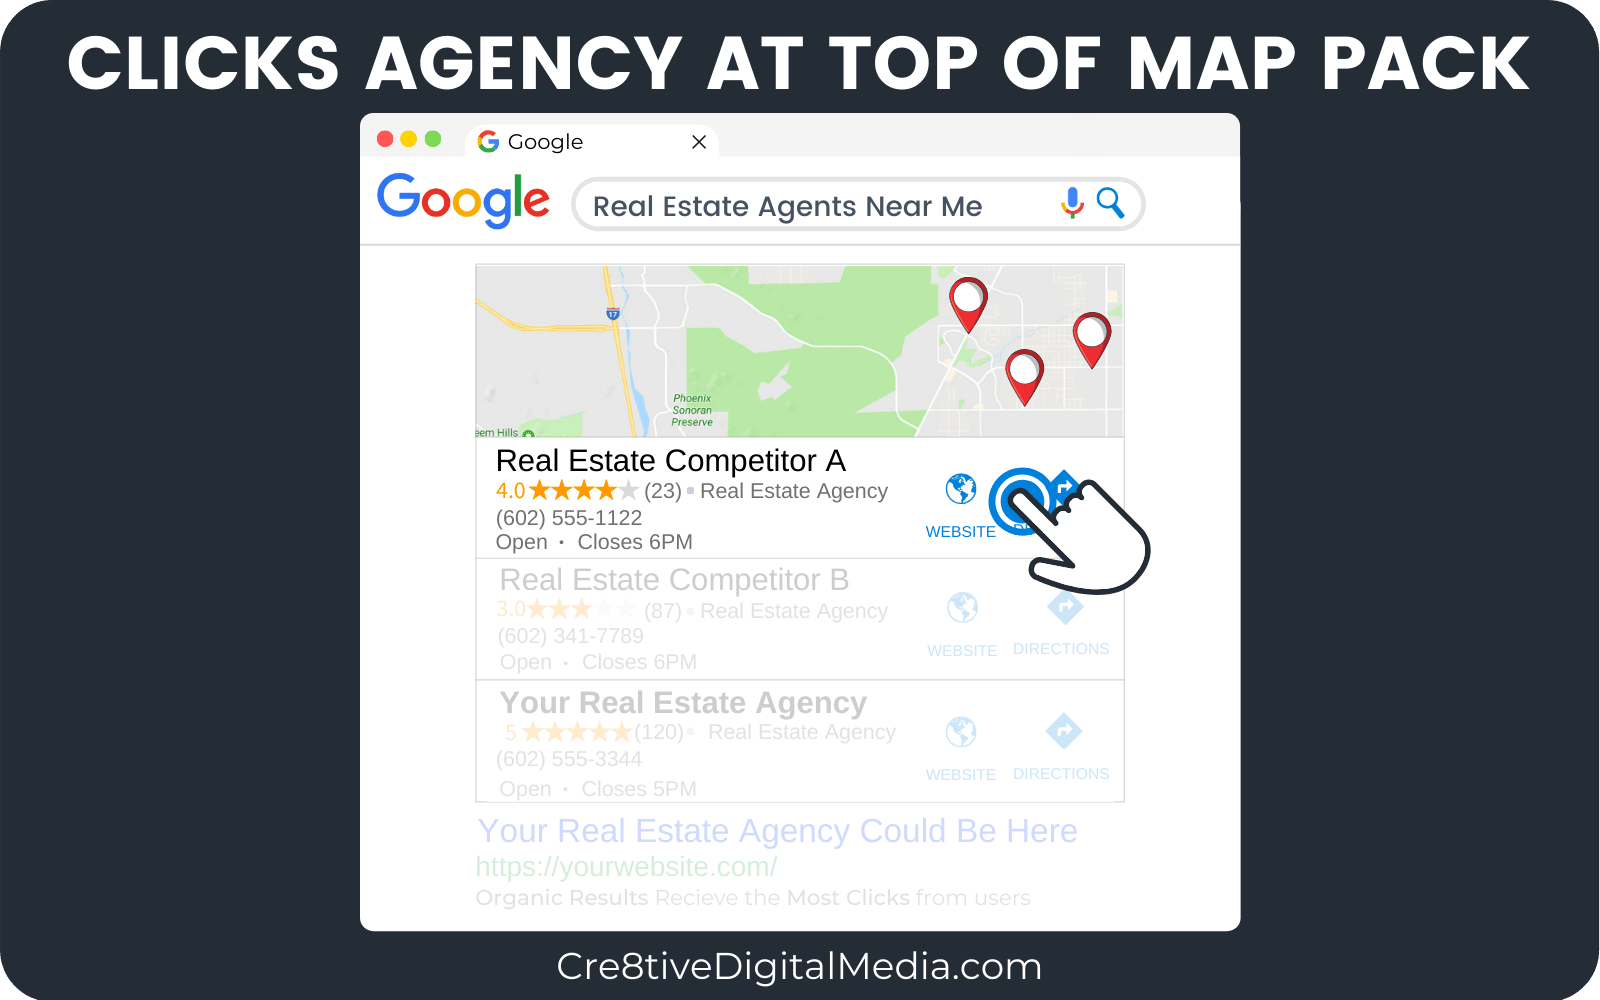 User clicks Real Estate Agency at top of map pack